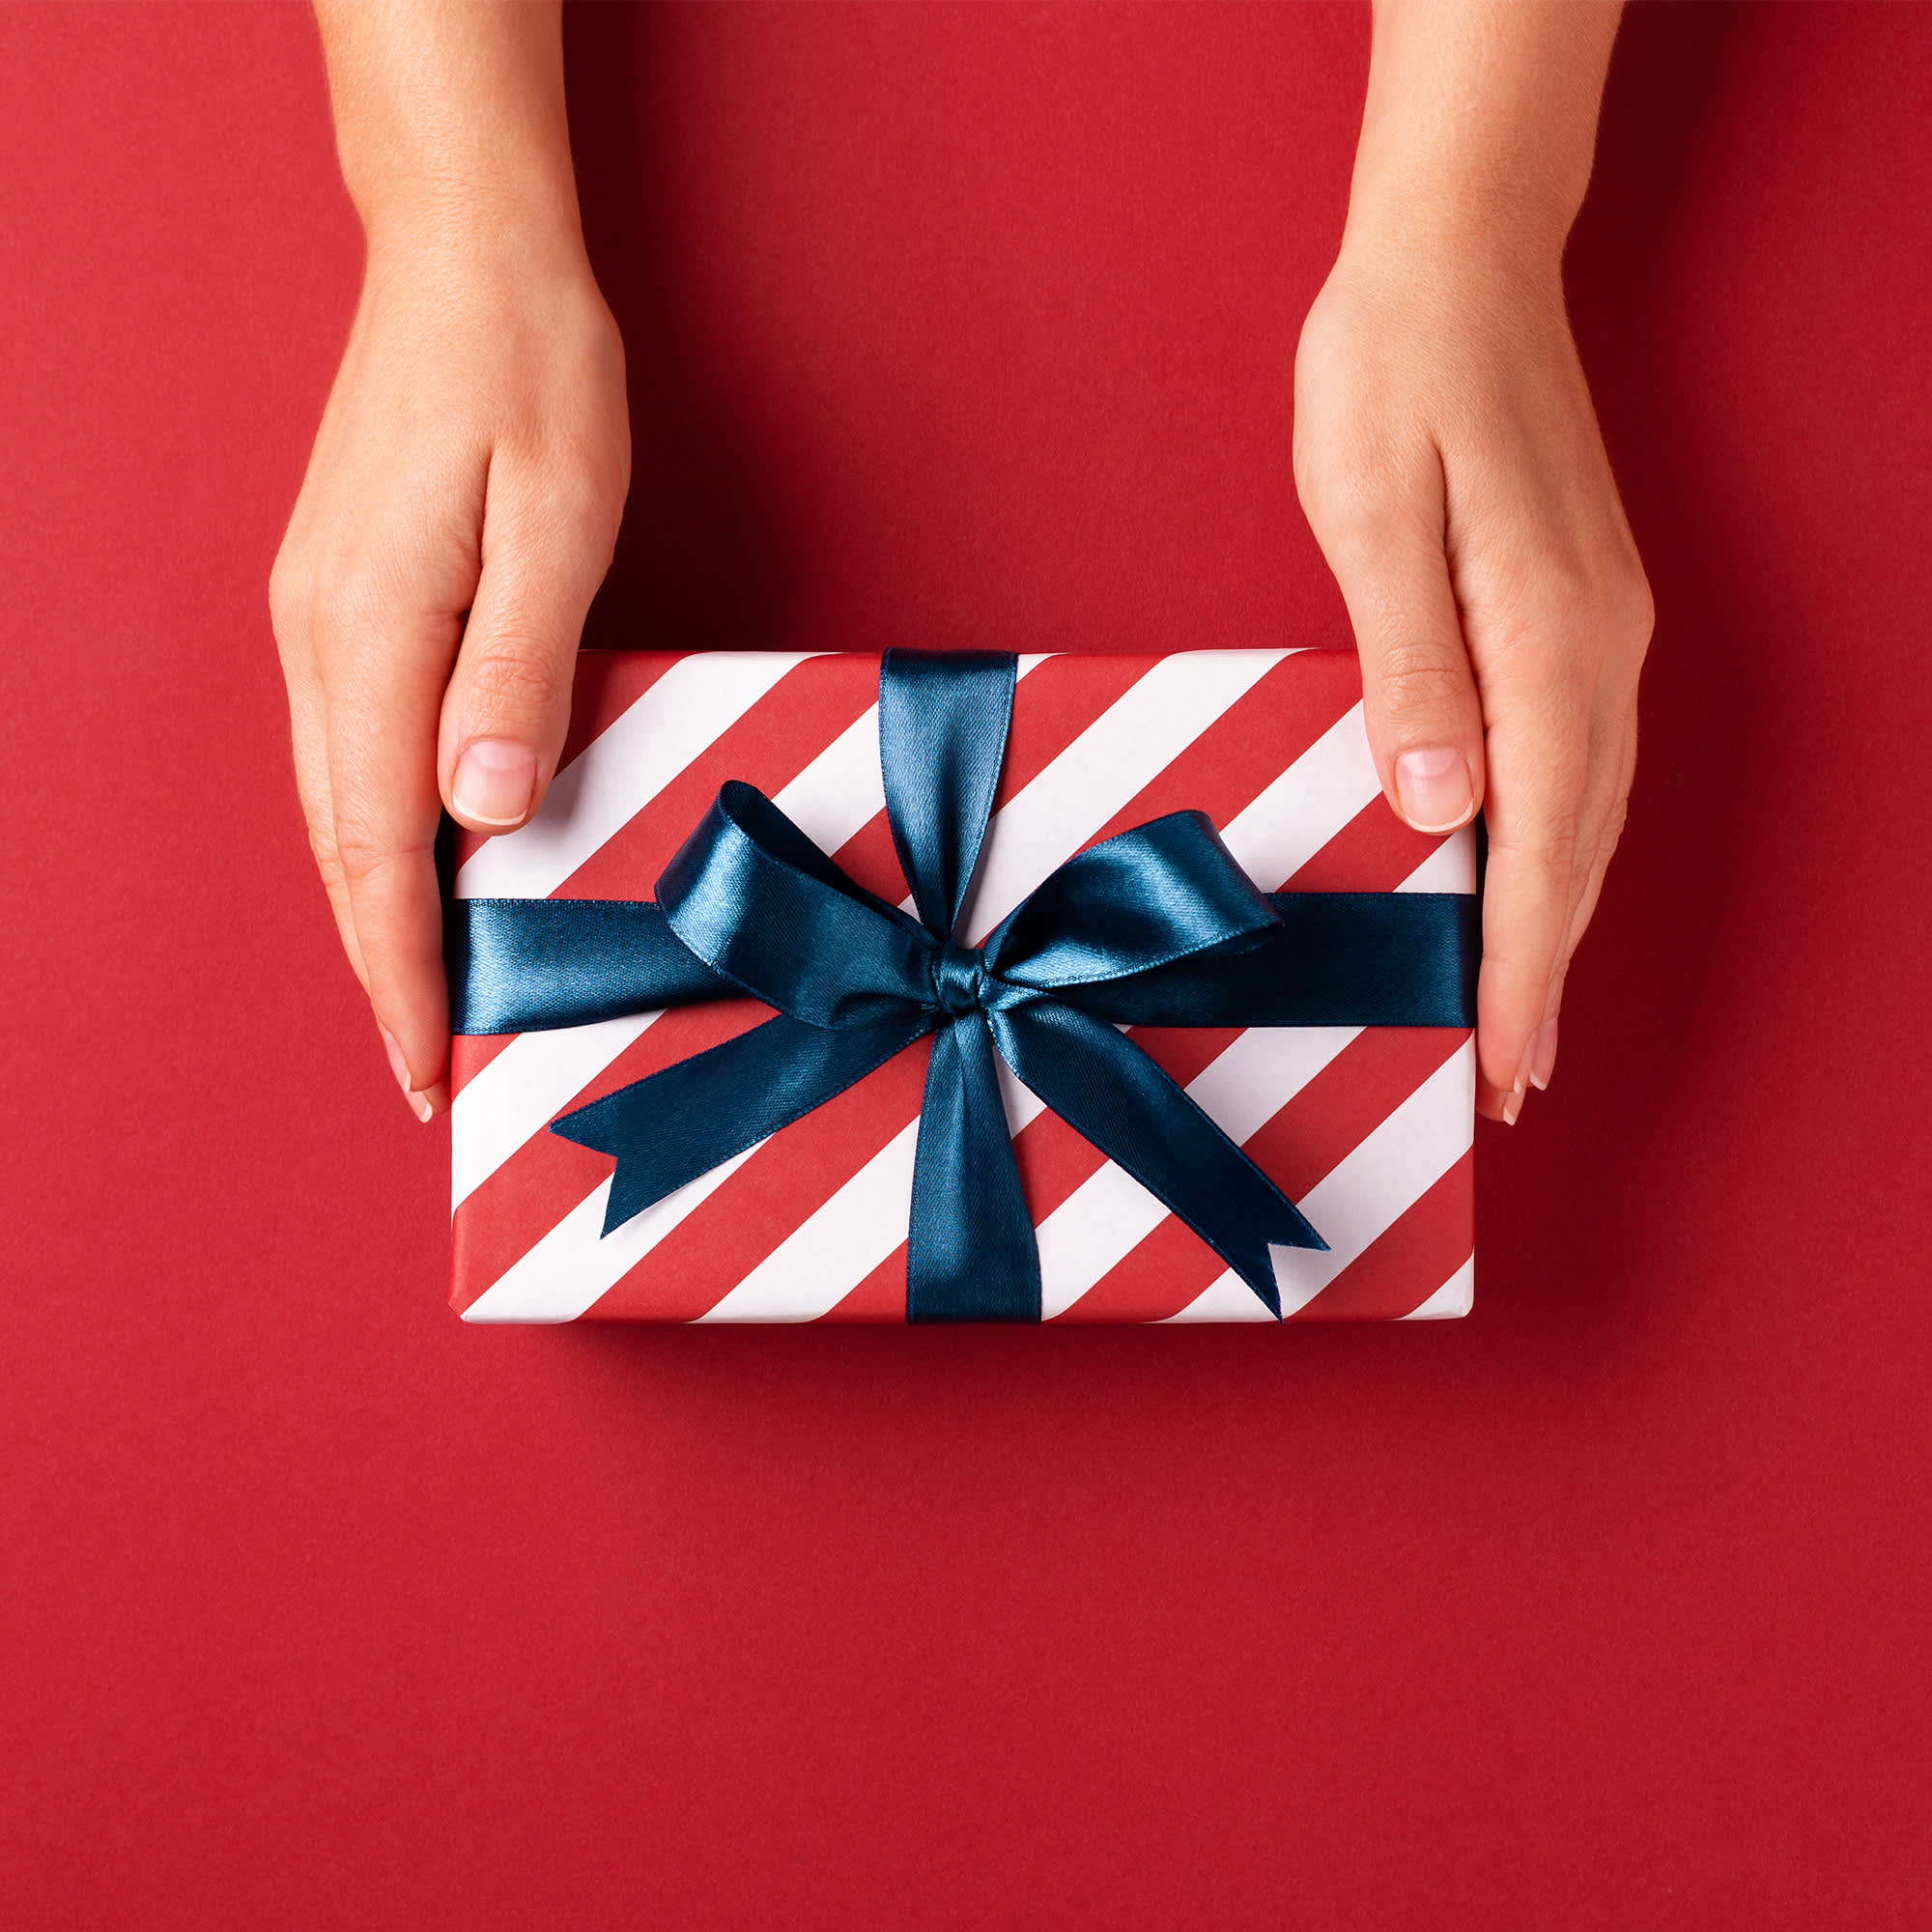 Don't miss the opportunity to grab the perfect gift! Give that special someone the chance to enjoy a unique experience in London with this gift card.